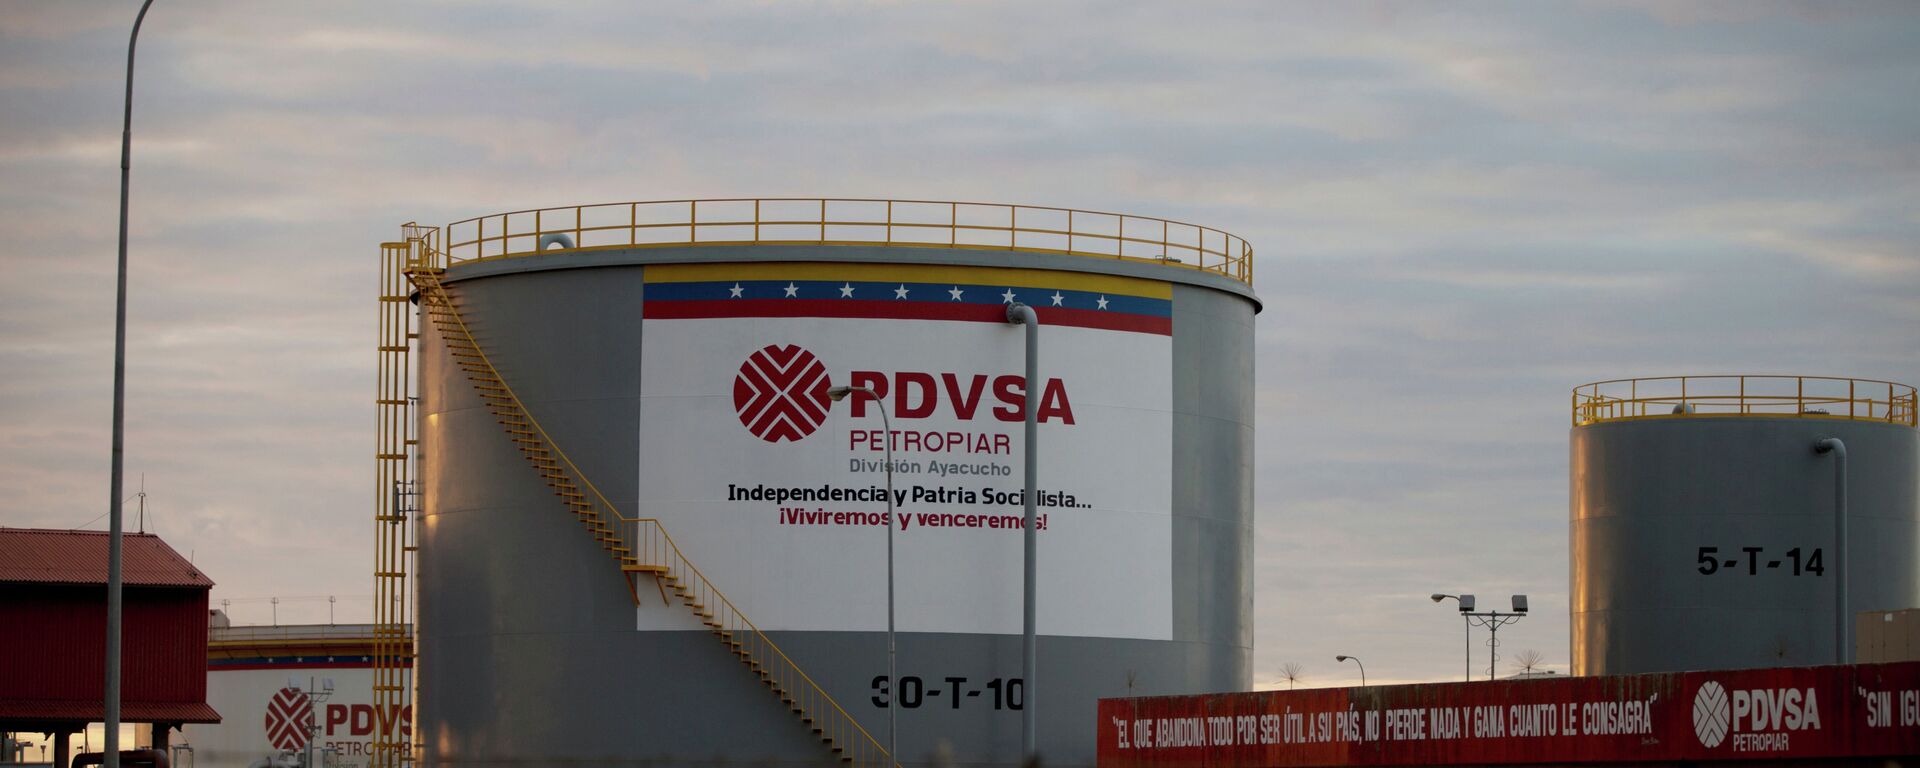 Storage tanks stand in a PDVSA state-run oil company crude oil complex near El Tigre, a town located within Venezuela's Hugo Chavez oil belt, formally known as the Orinoco Belt - Sputnik International, 1920, 10.03.2022